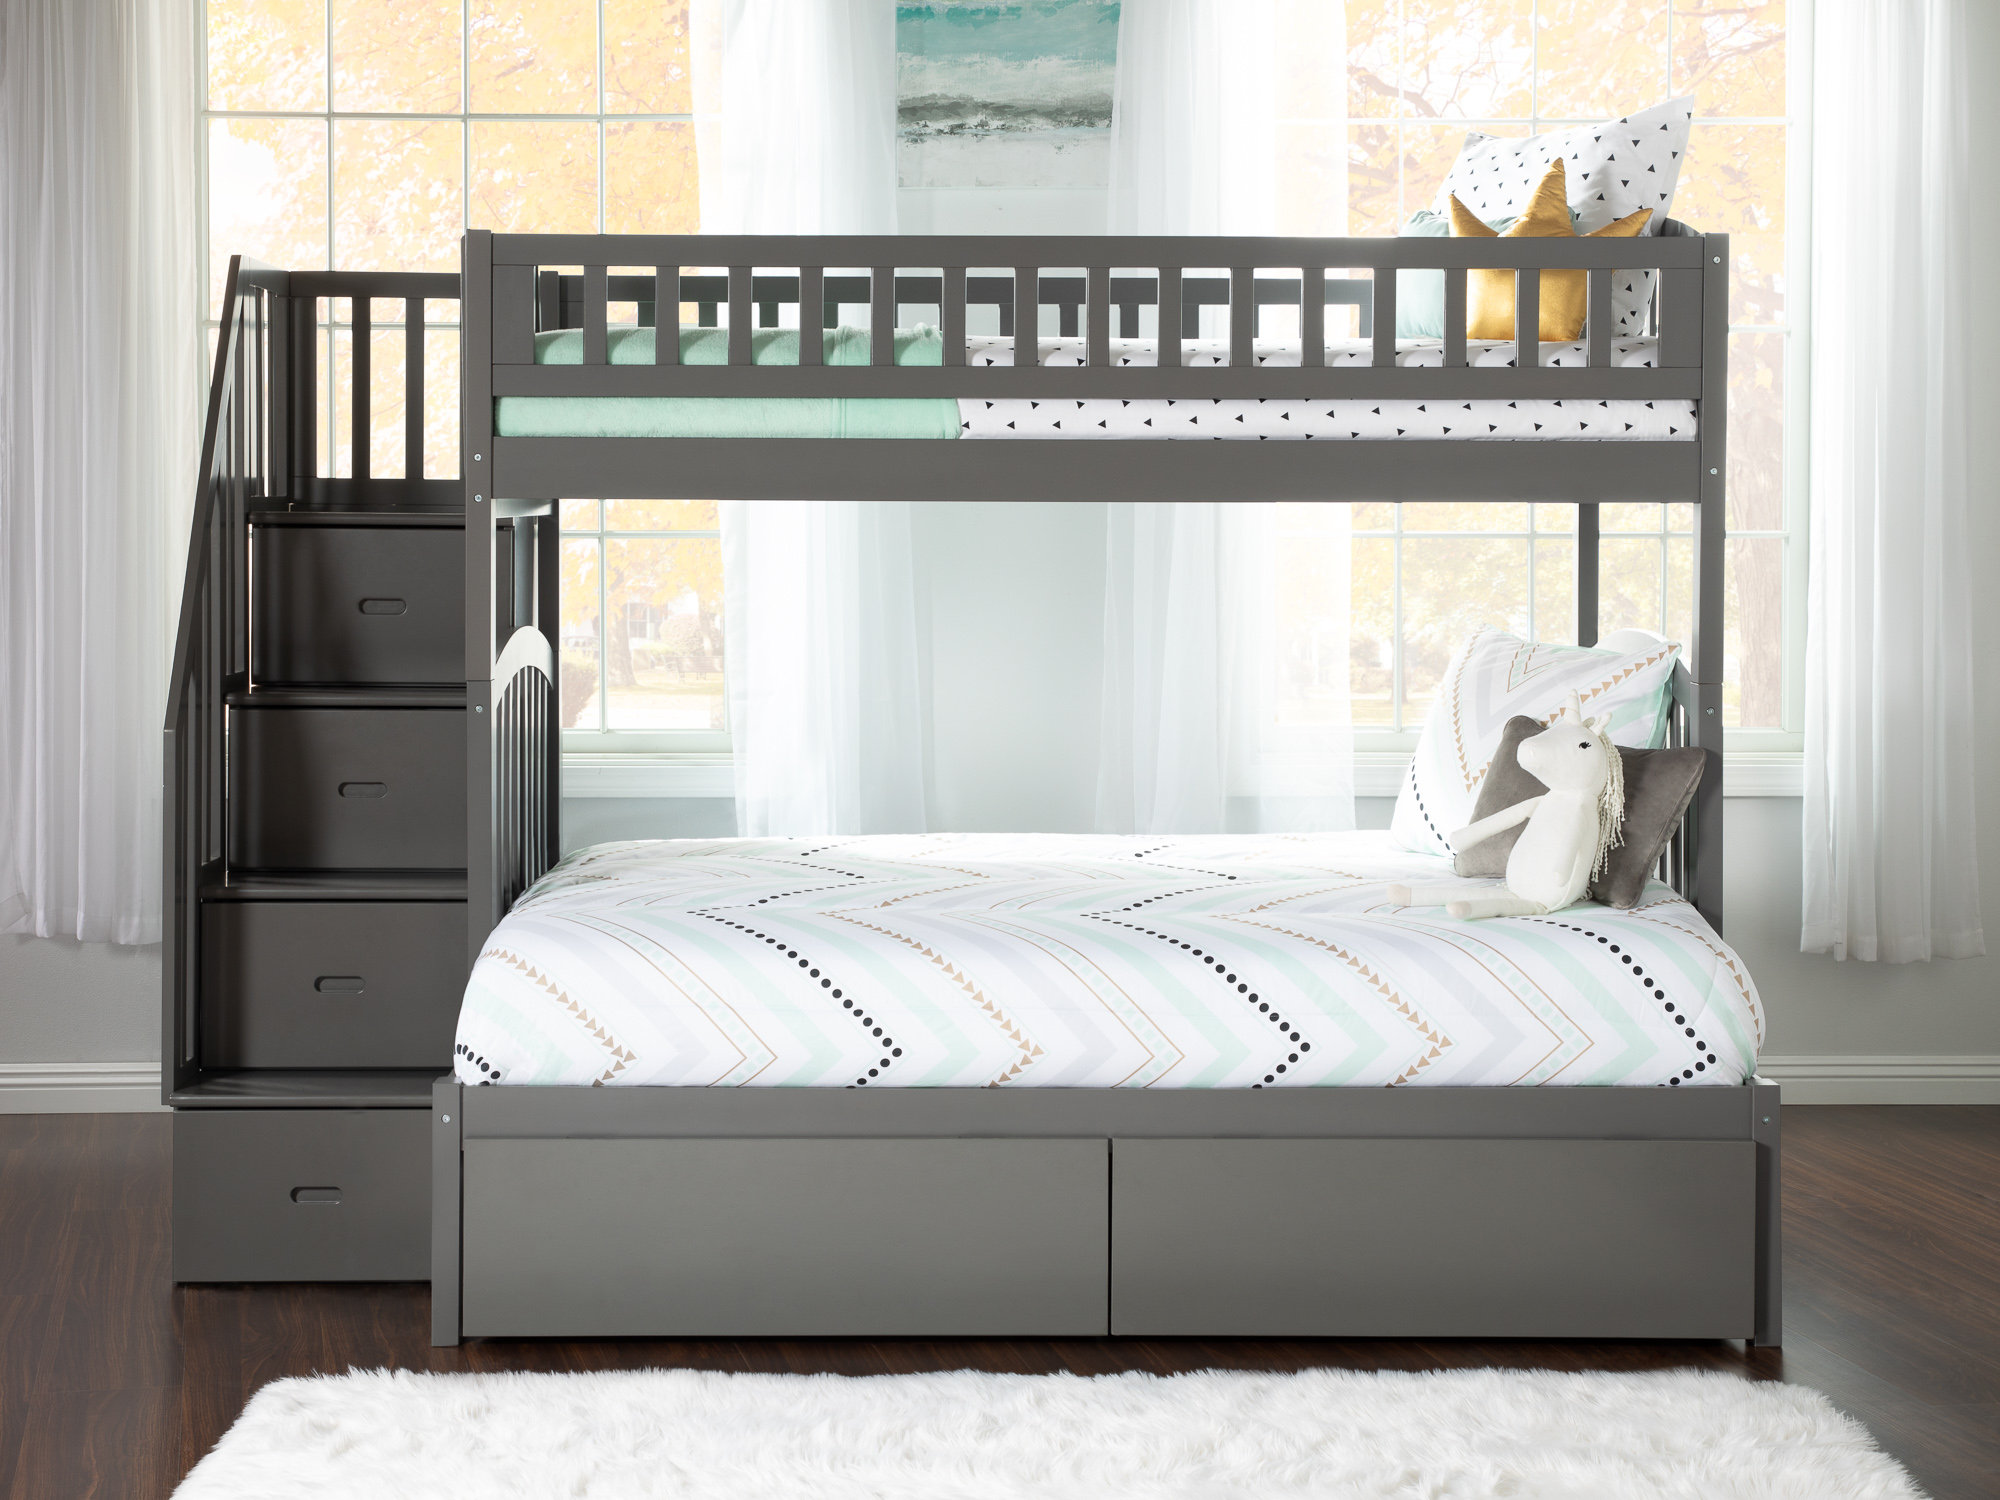 Harriet Bee Salem Staircase Twin Over Full Bed With Drawers